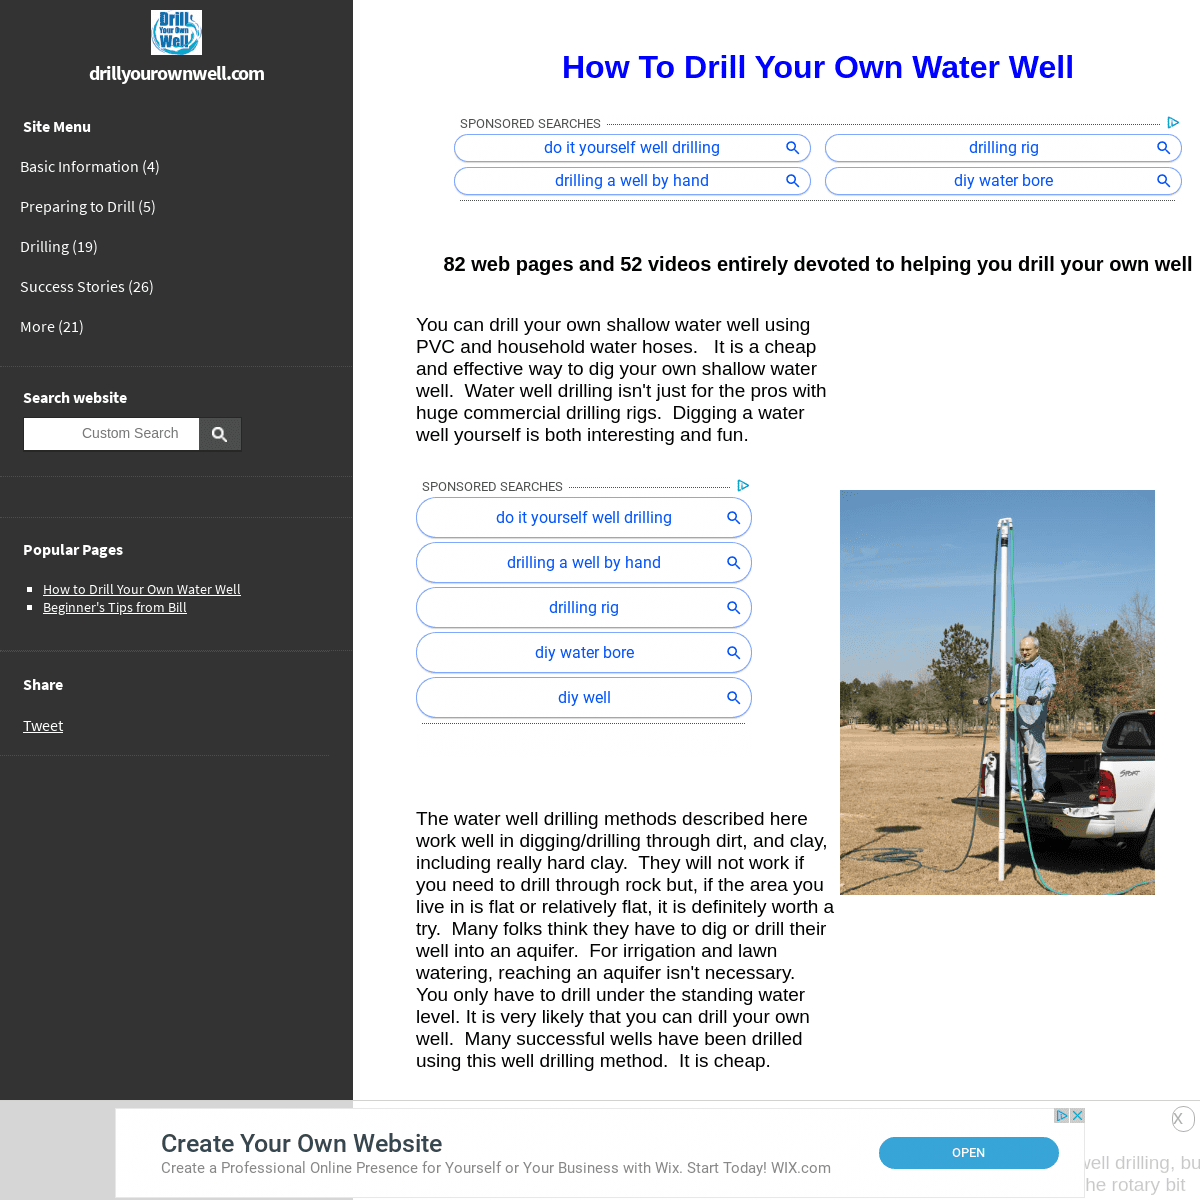 A complete backup of drillyourownwell.com